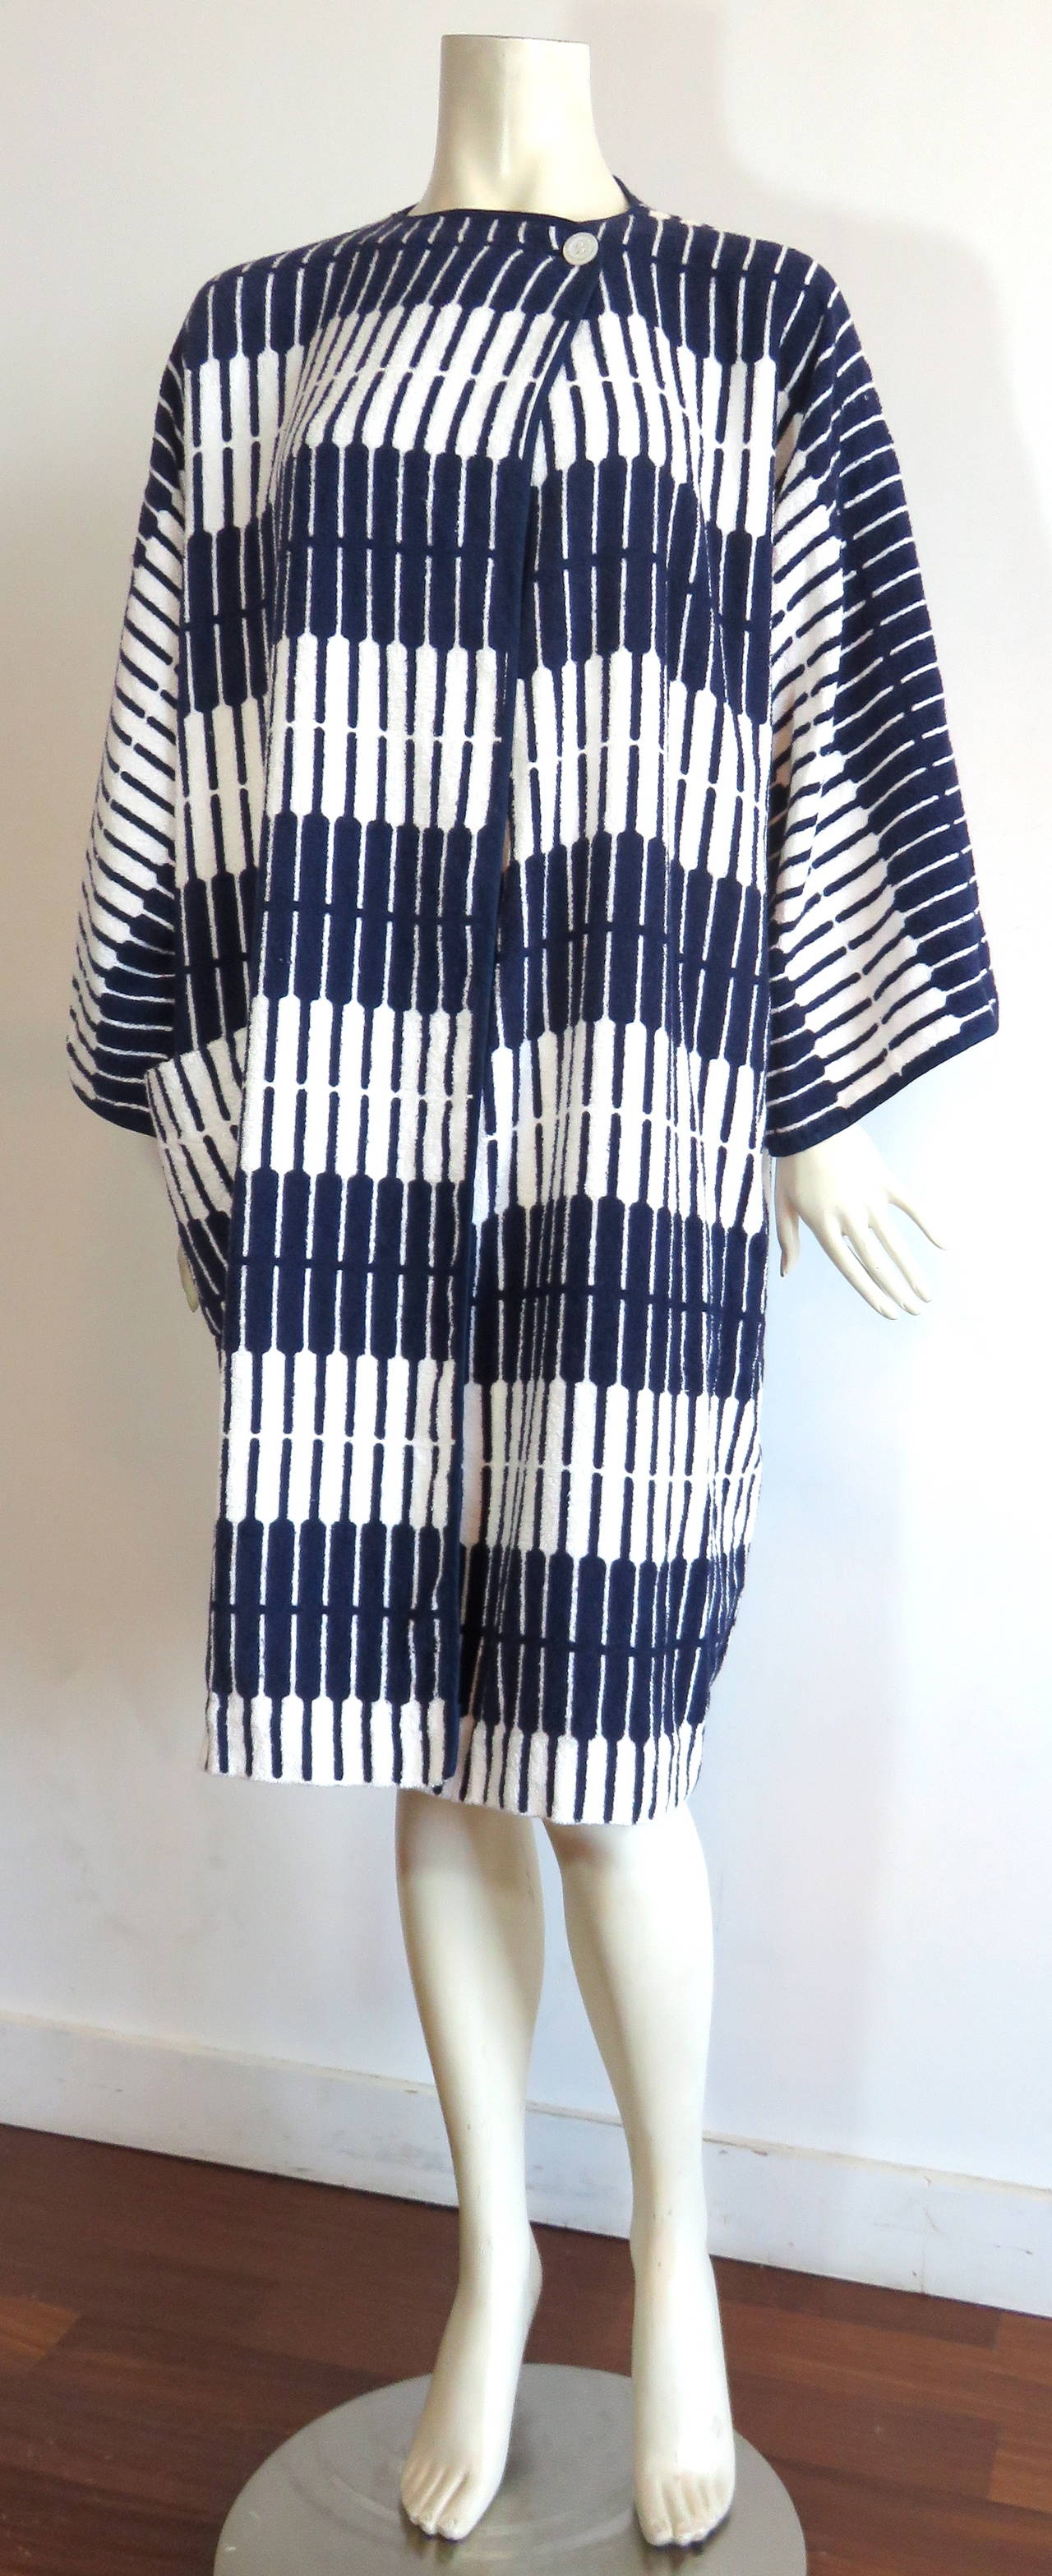 Pristine condition, 1970's GIVENCHY Couture, french terry cloth robe / cover-up.

In 'like new' condition with absolutely no signs of wear or damages.

French terry cloth fabrication with dark indigo blue, 'piano stripe' printed artwork atop